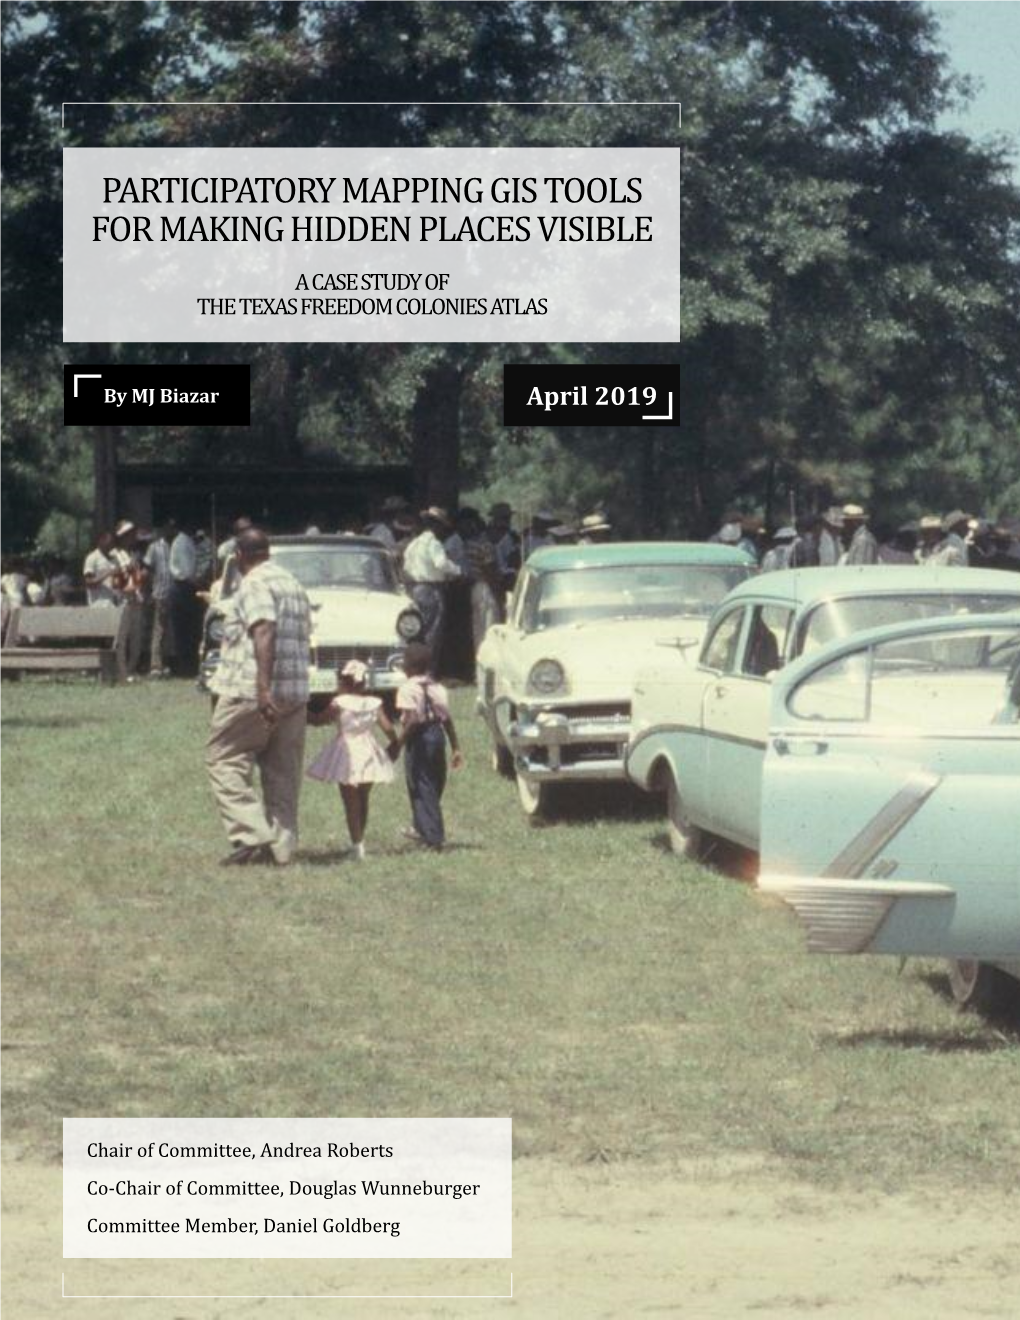 Participatory Mapping Gis Tools for Making Hidden Places Visible